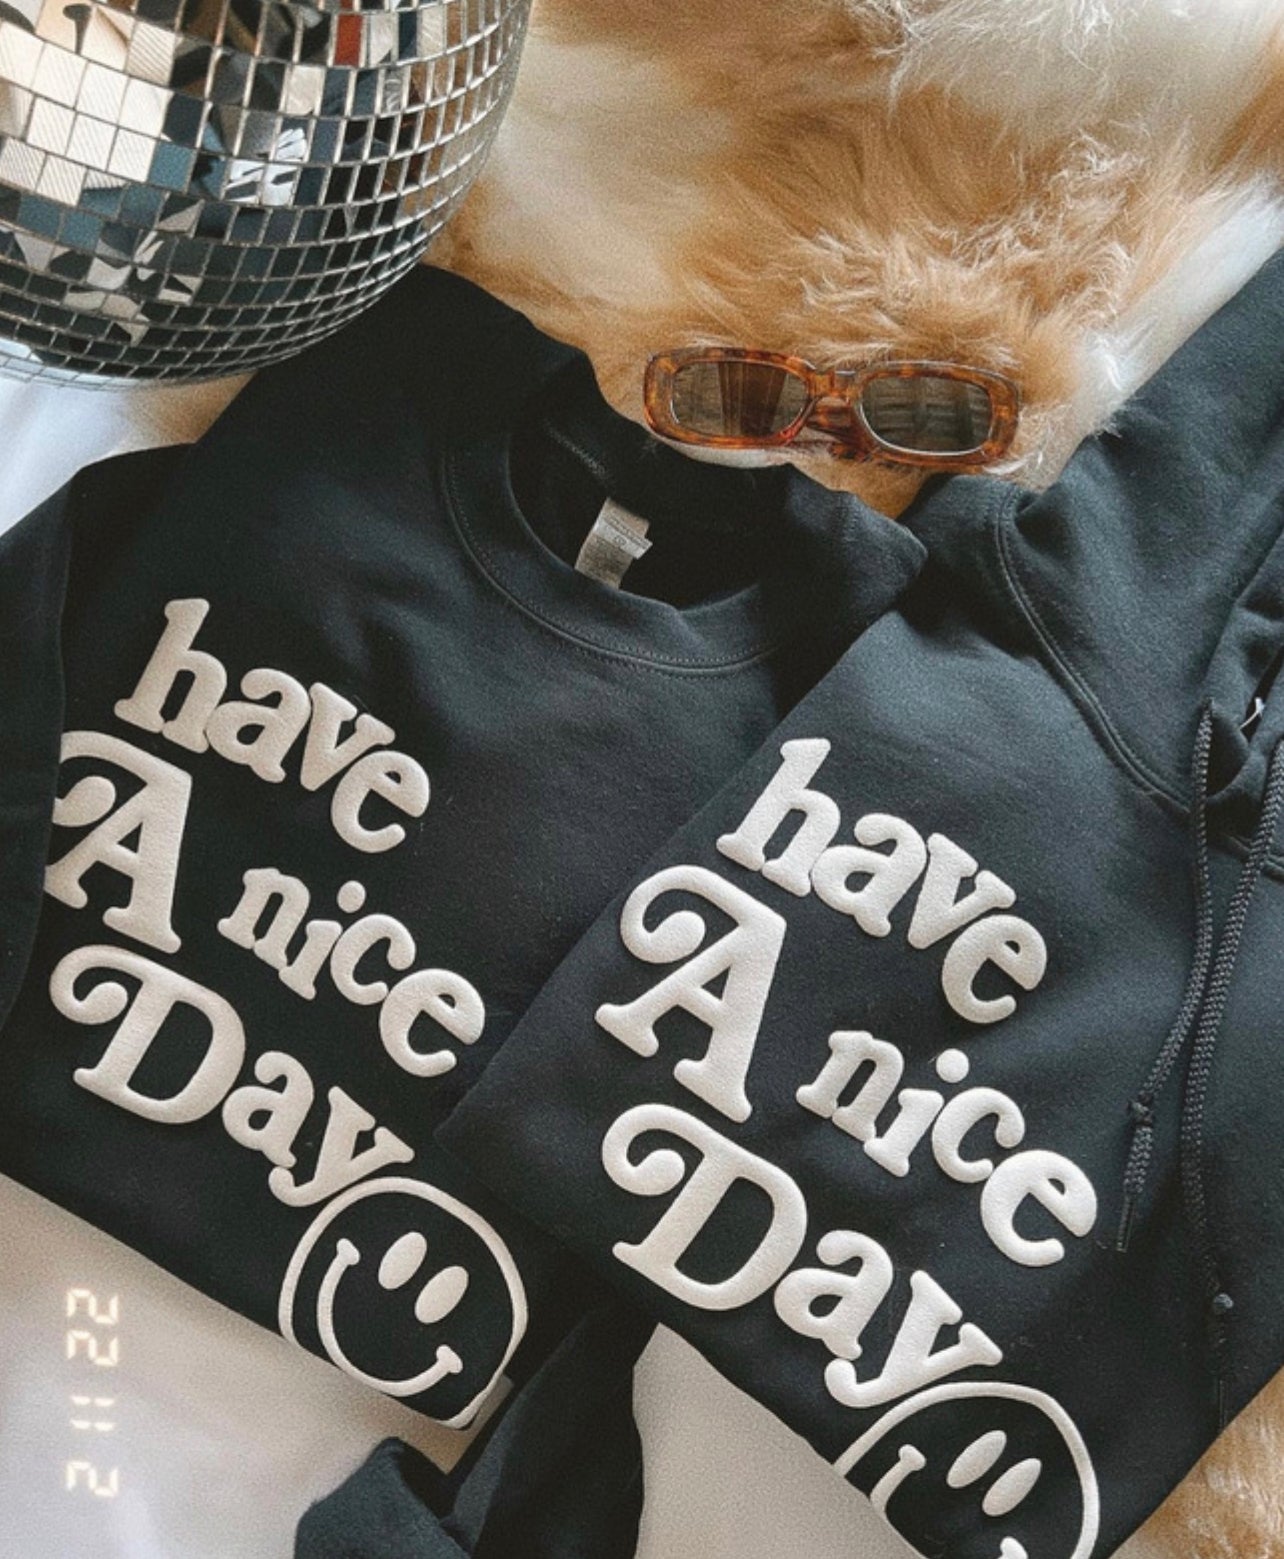 Have a nice day - crew or hoodie